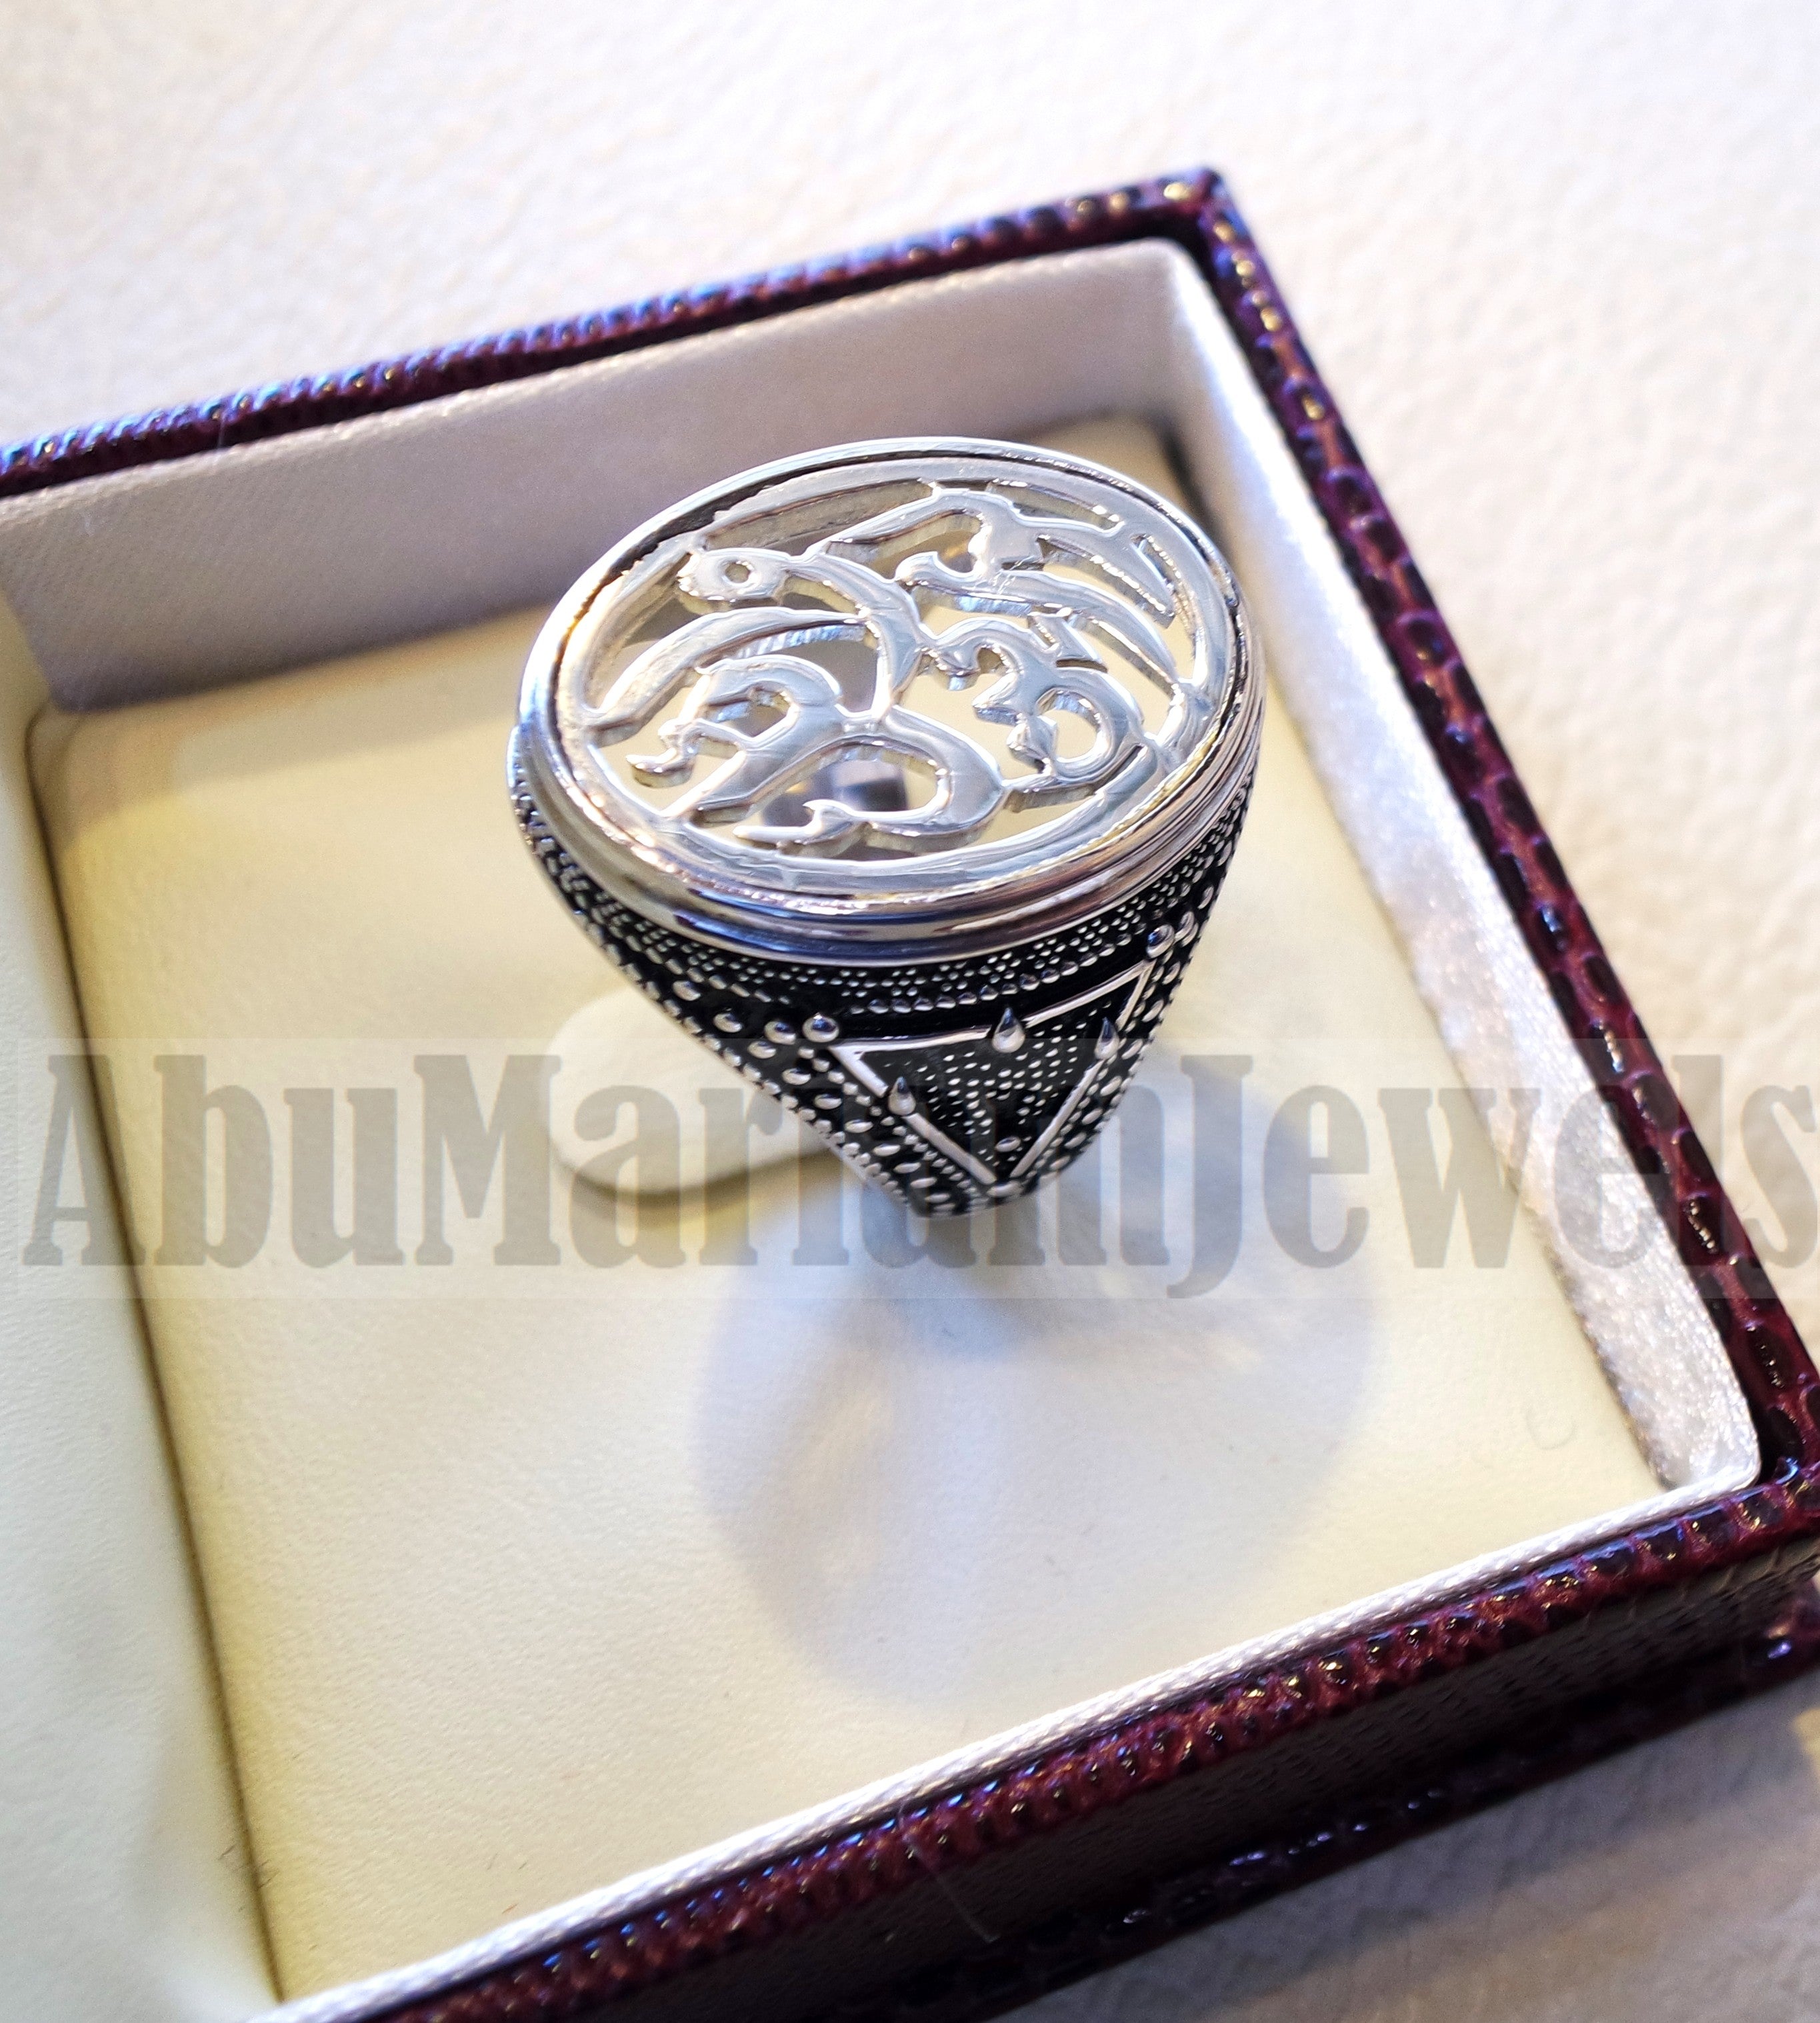 Customized Arabic calligraphy names handmade ring personalized antique jewelry style sterling silver 925 any size TSN1007 خاتم اسم تفصيل